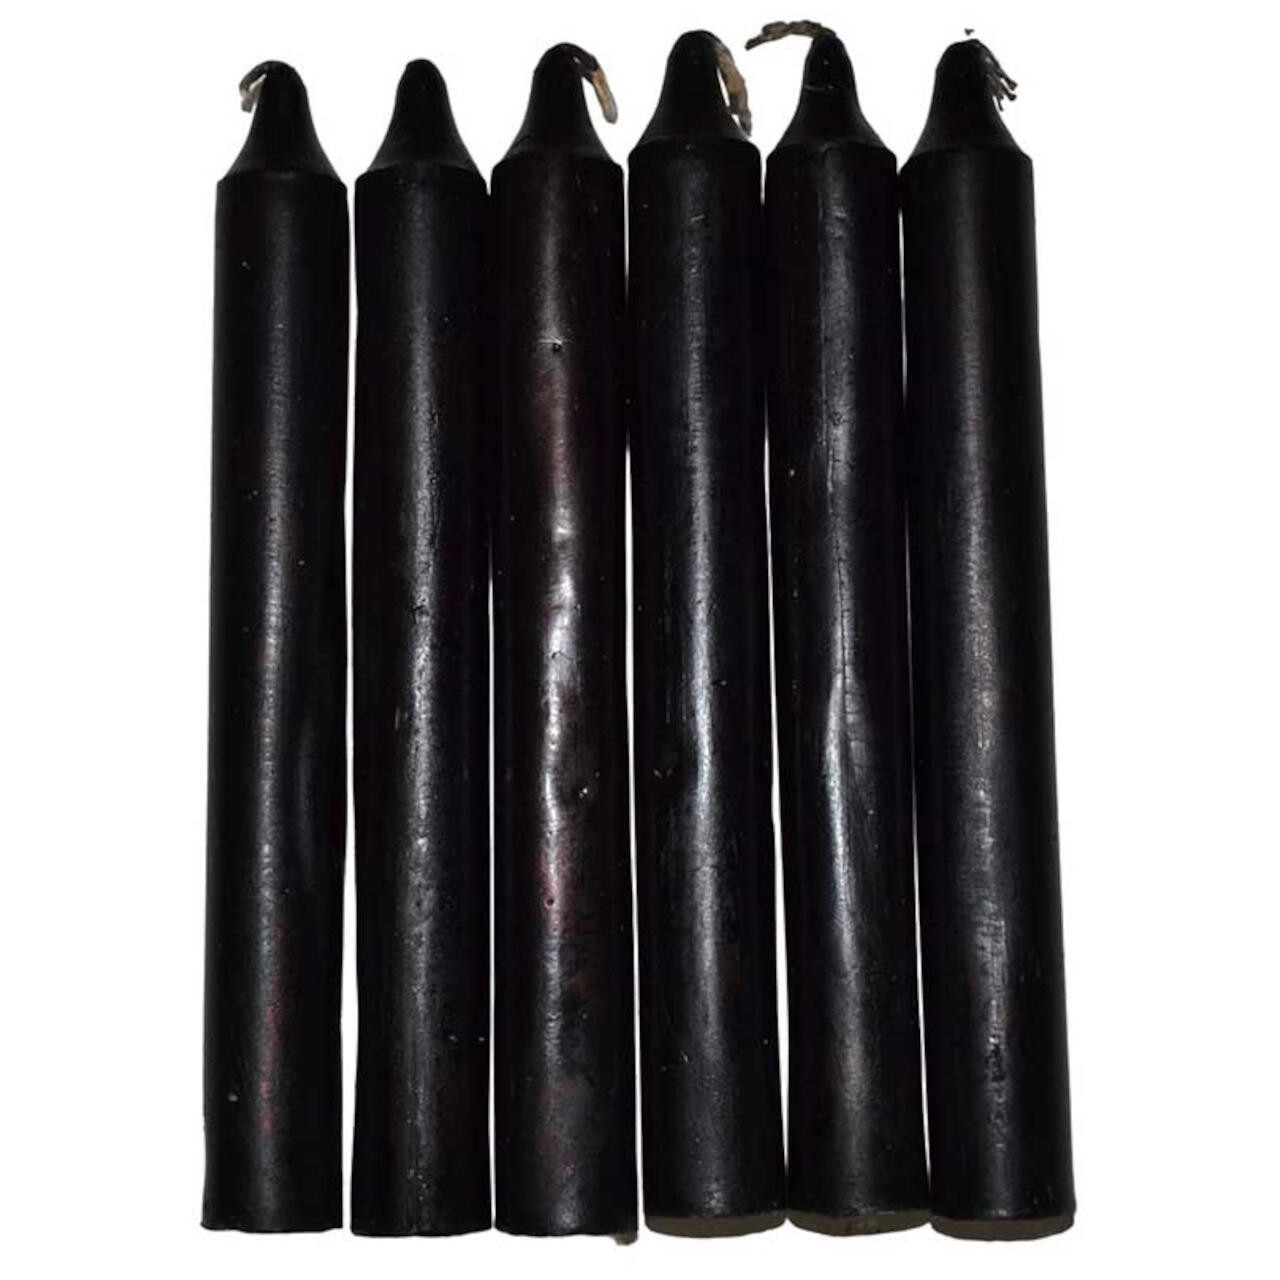 Black 6" Household Candle (Set Of 6)